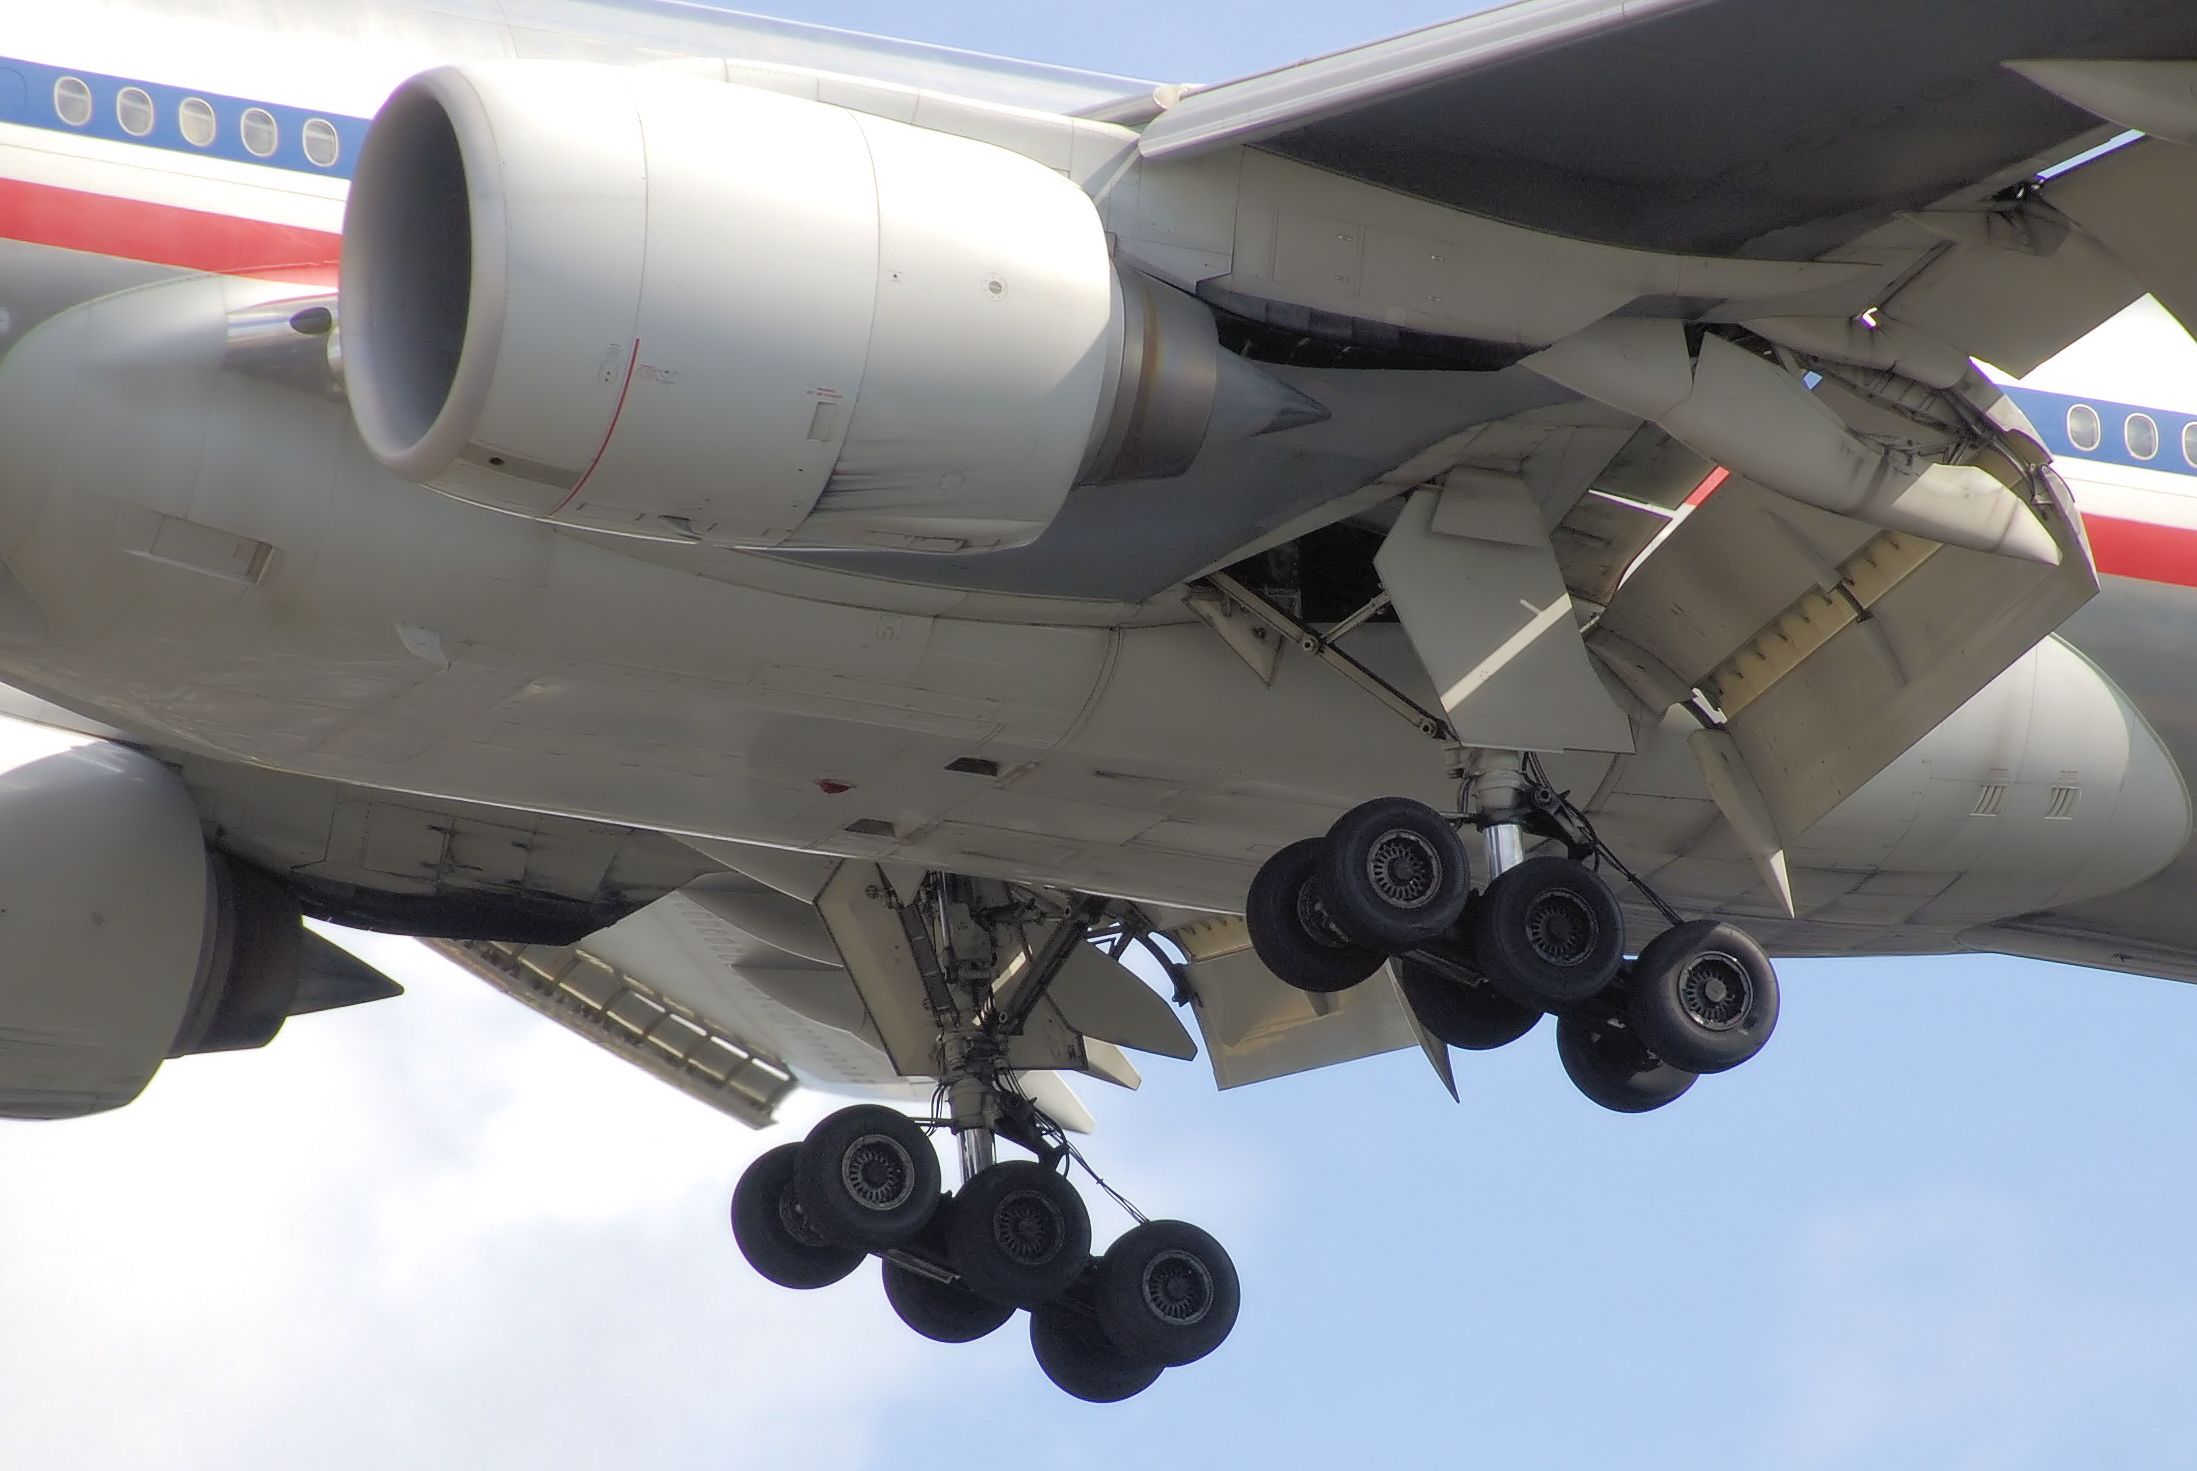 An American Airlines Boeing 777-200ER landing gear and flaps